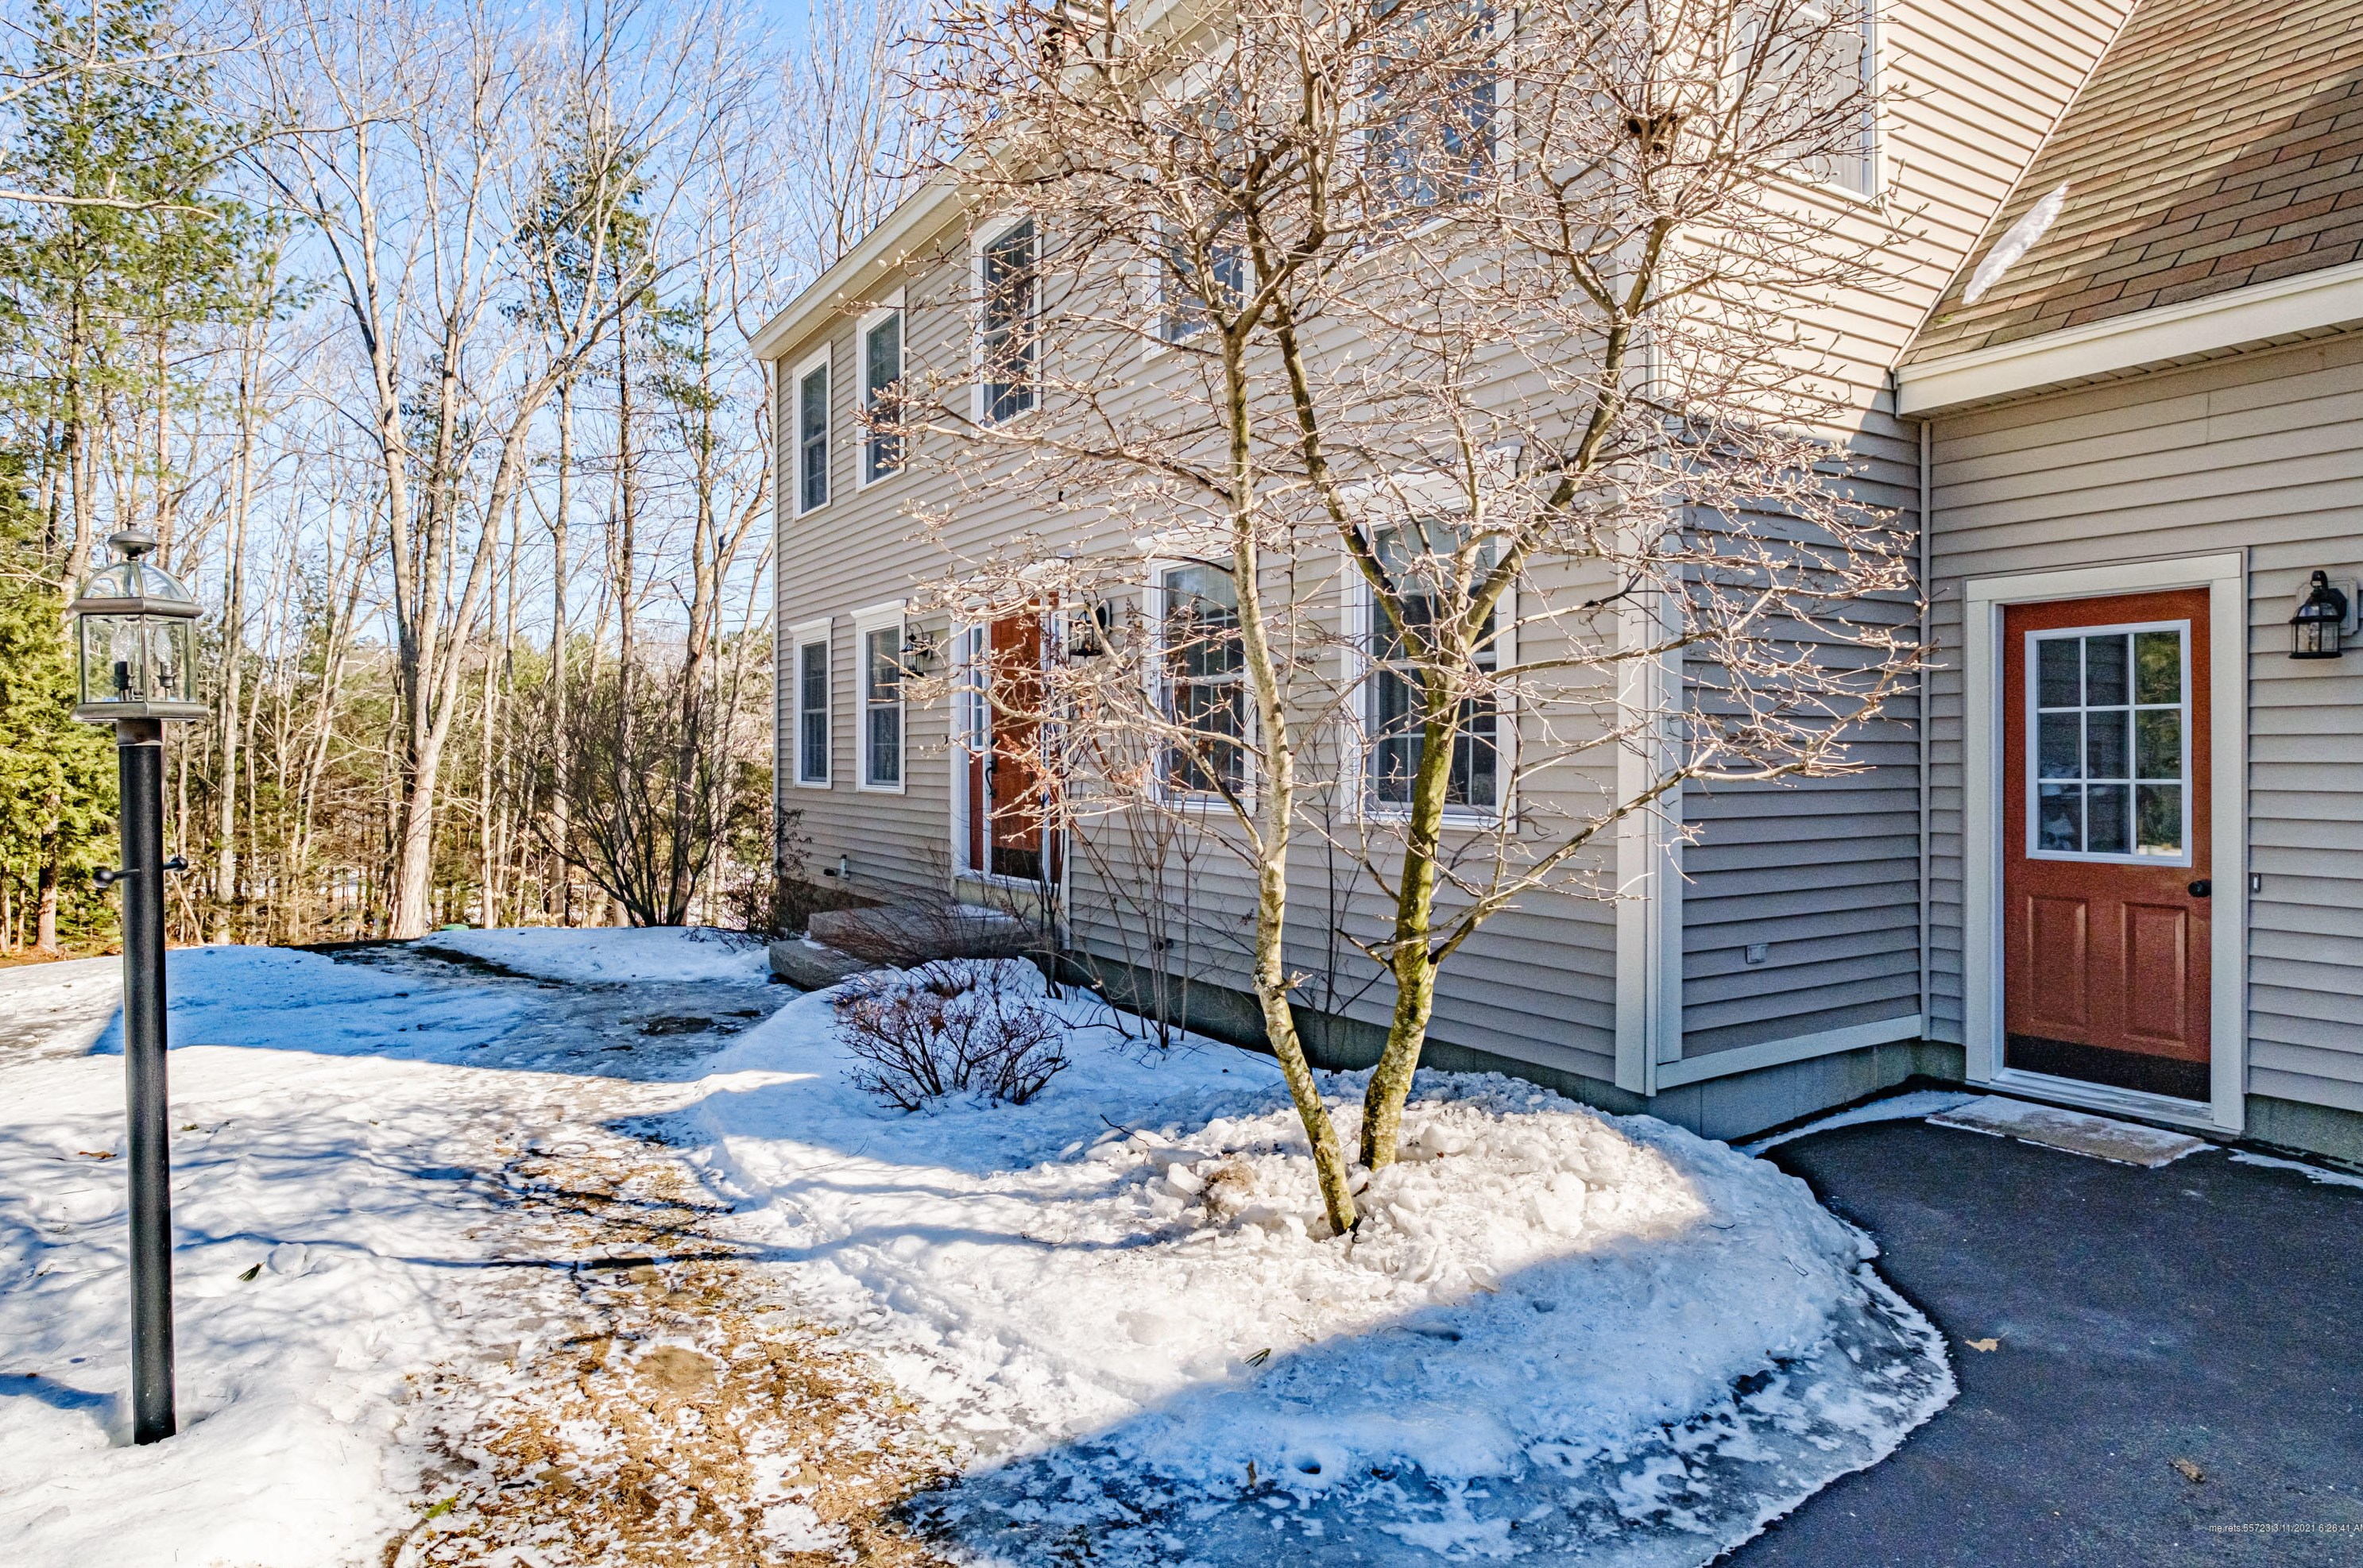 25 Woodfield Dr, Scarborough, ME 04074